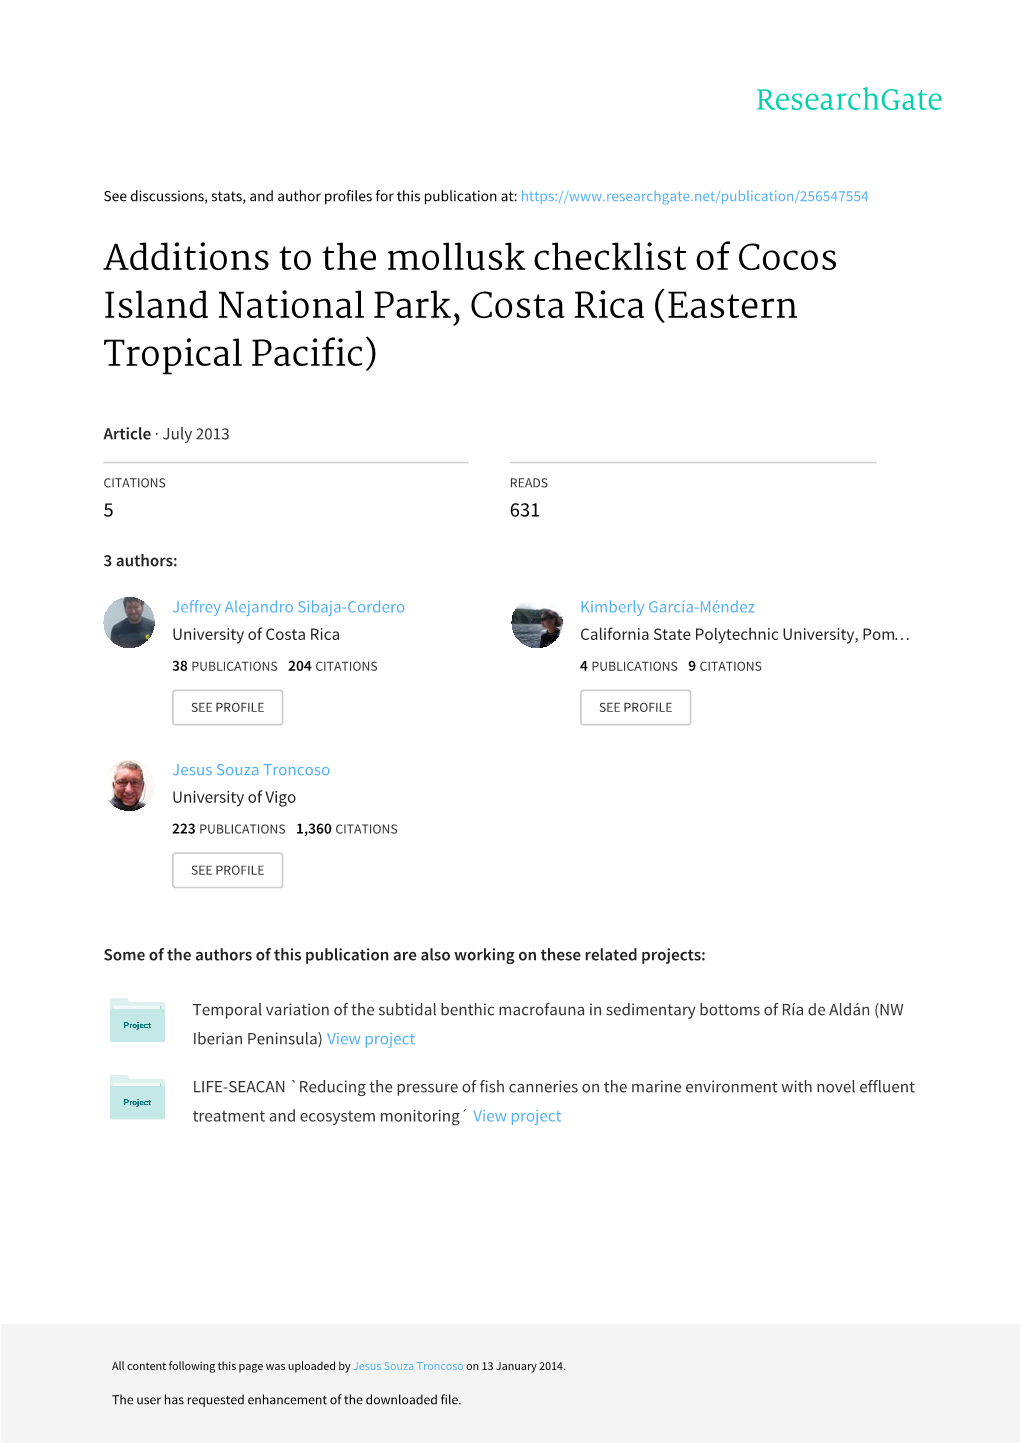 Additions to the Mollusk Checklist of Cocos Island National Park, Costa Rica (Eastern Tropical Pacific)